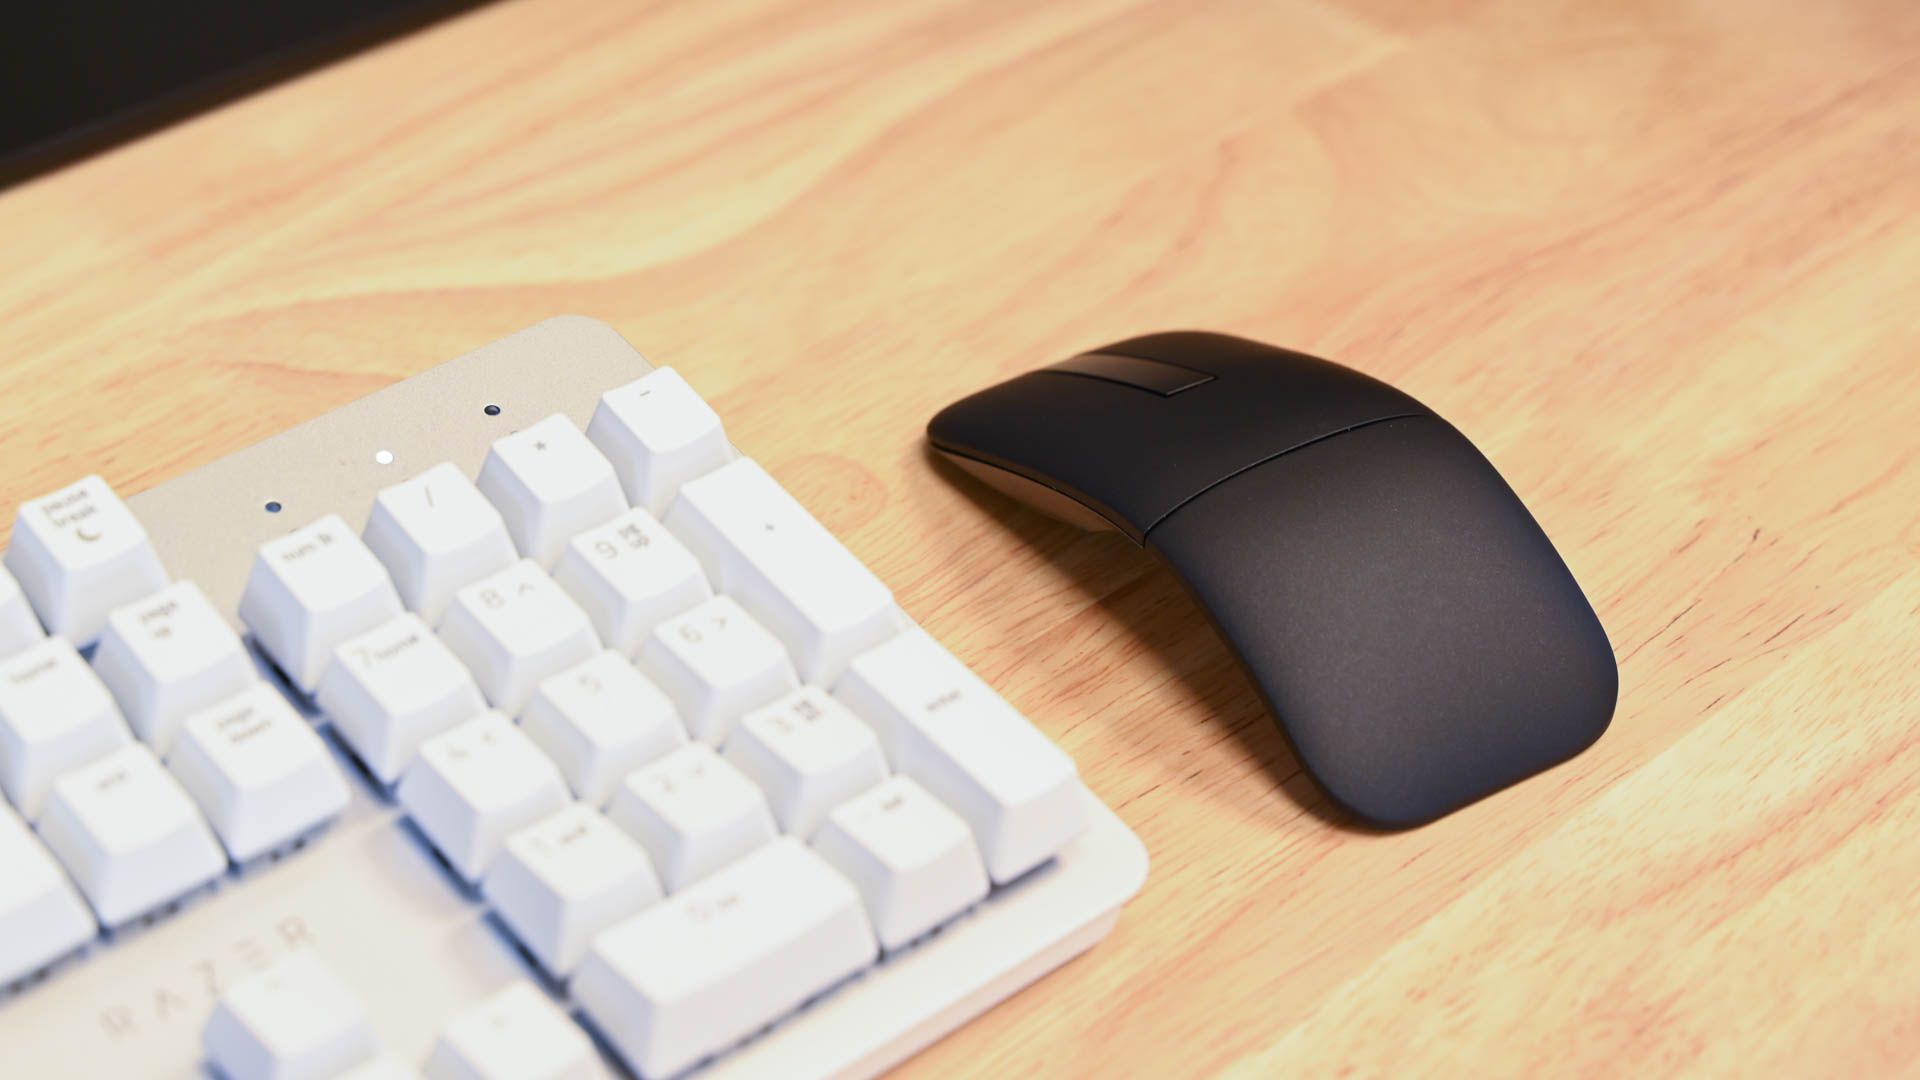 Keyboard and mouse.